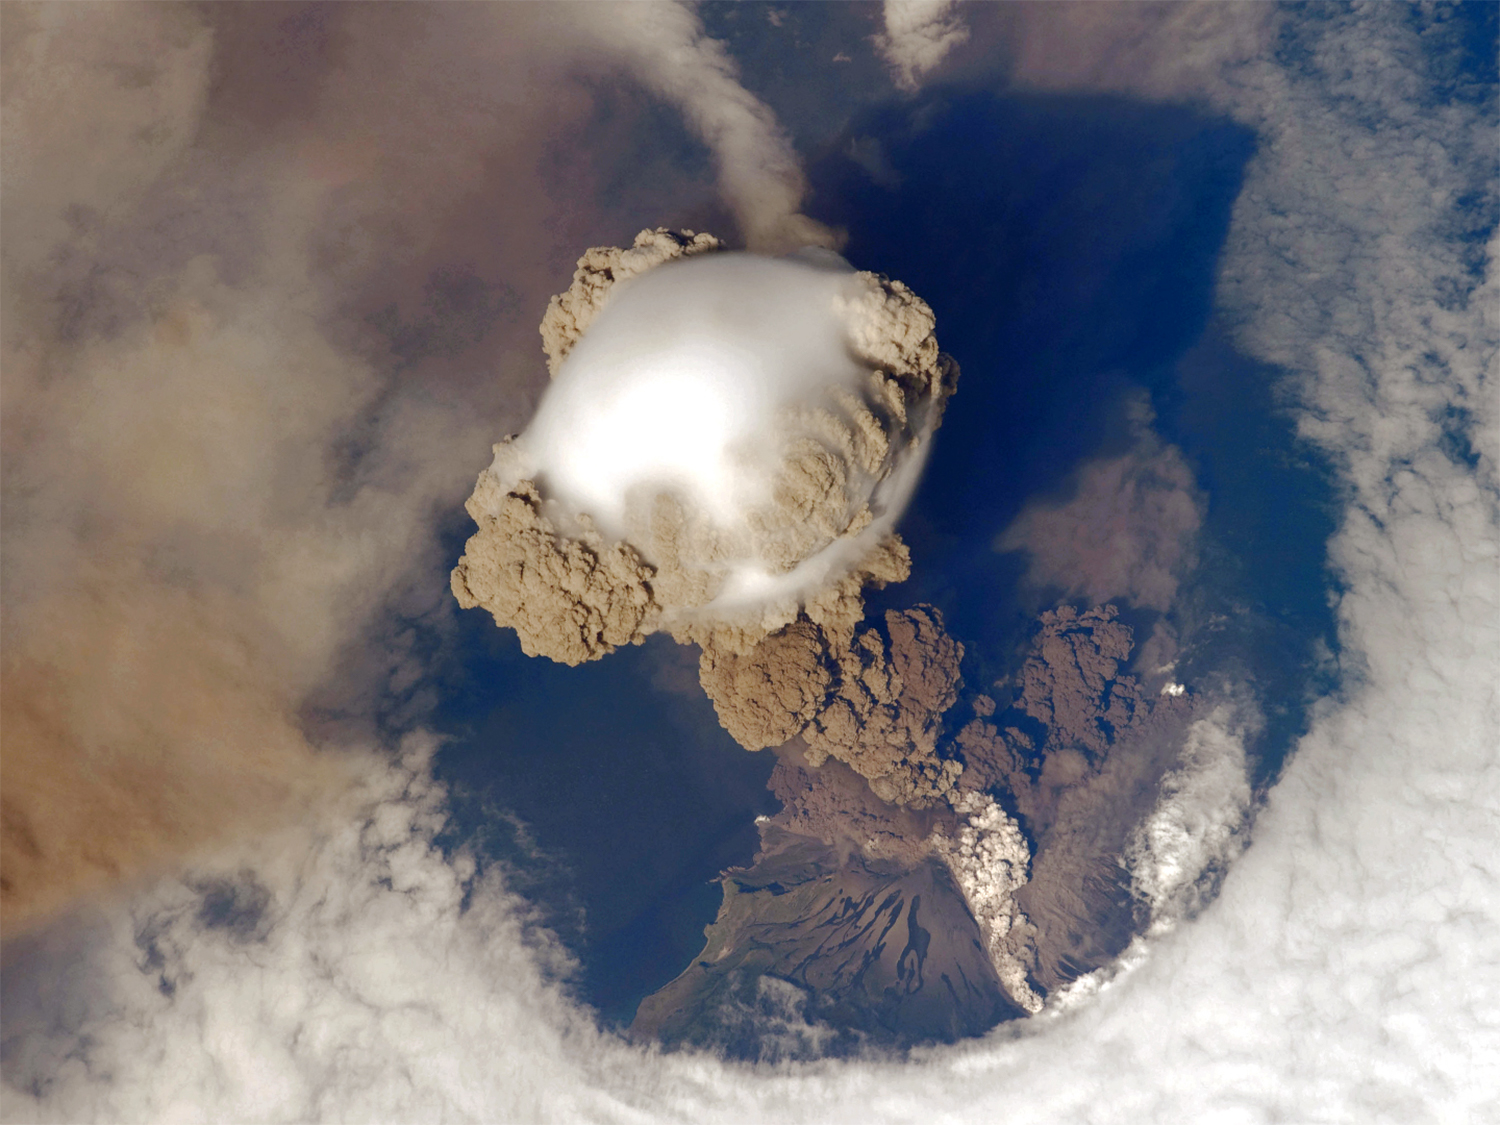 The eruption of Sarychev volcano in 2009.